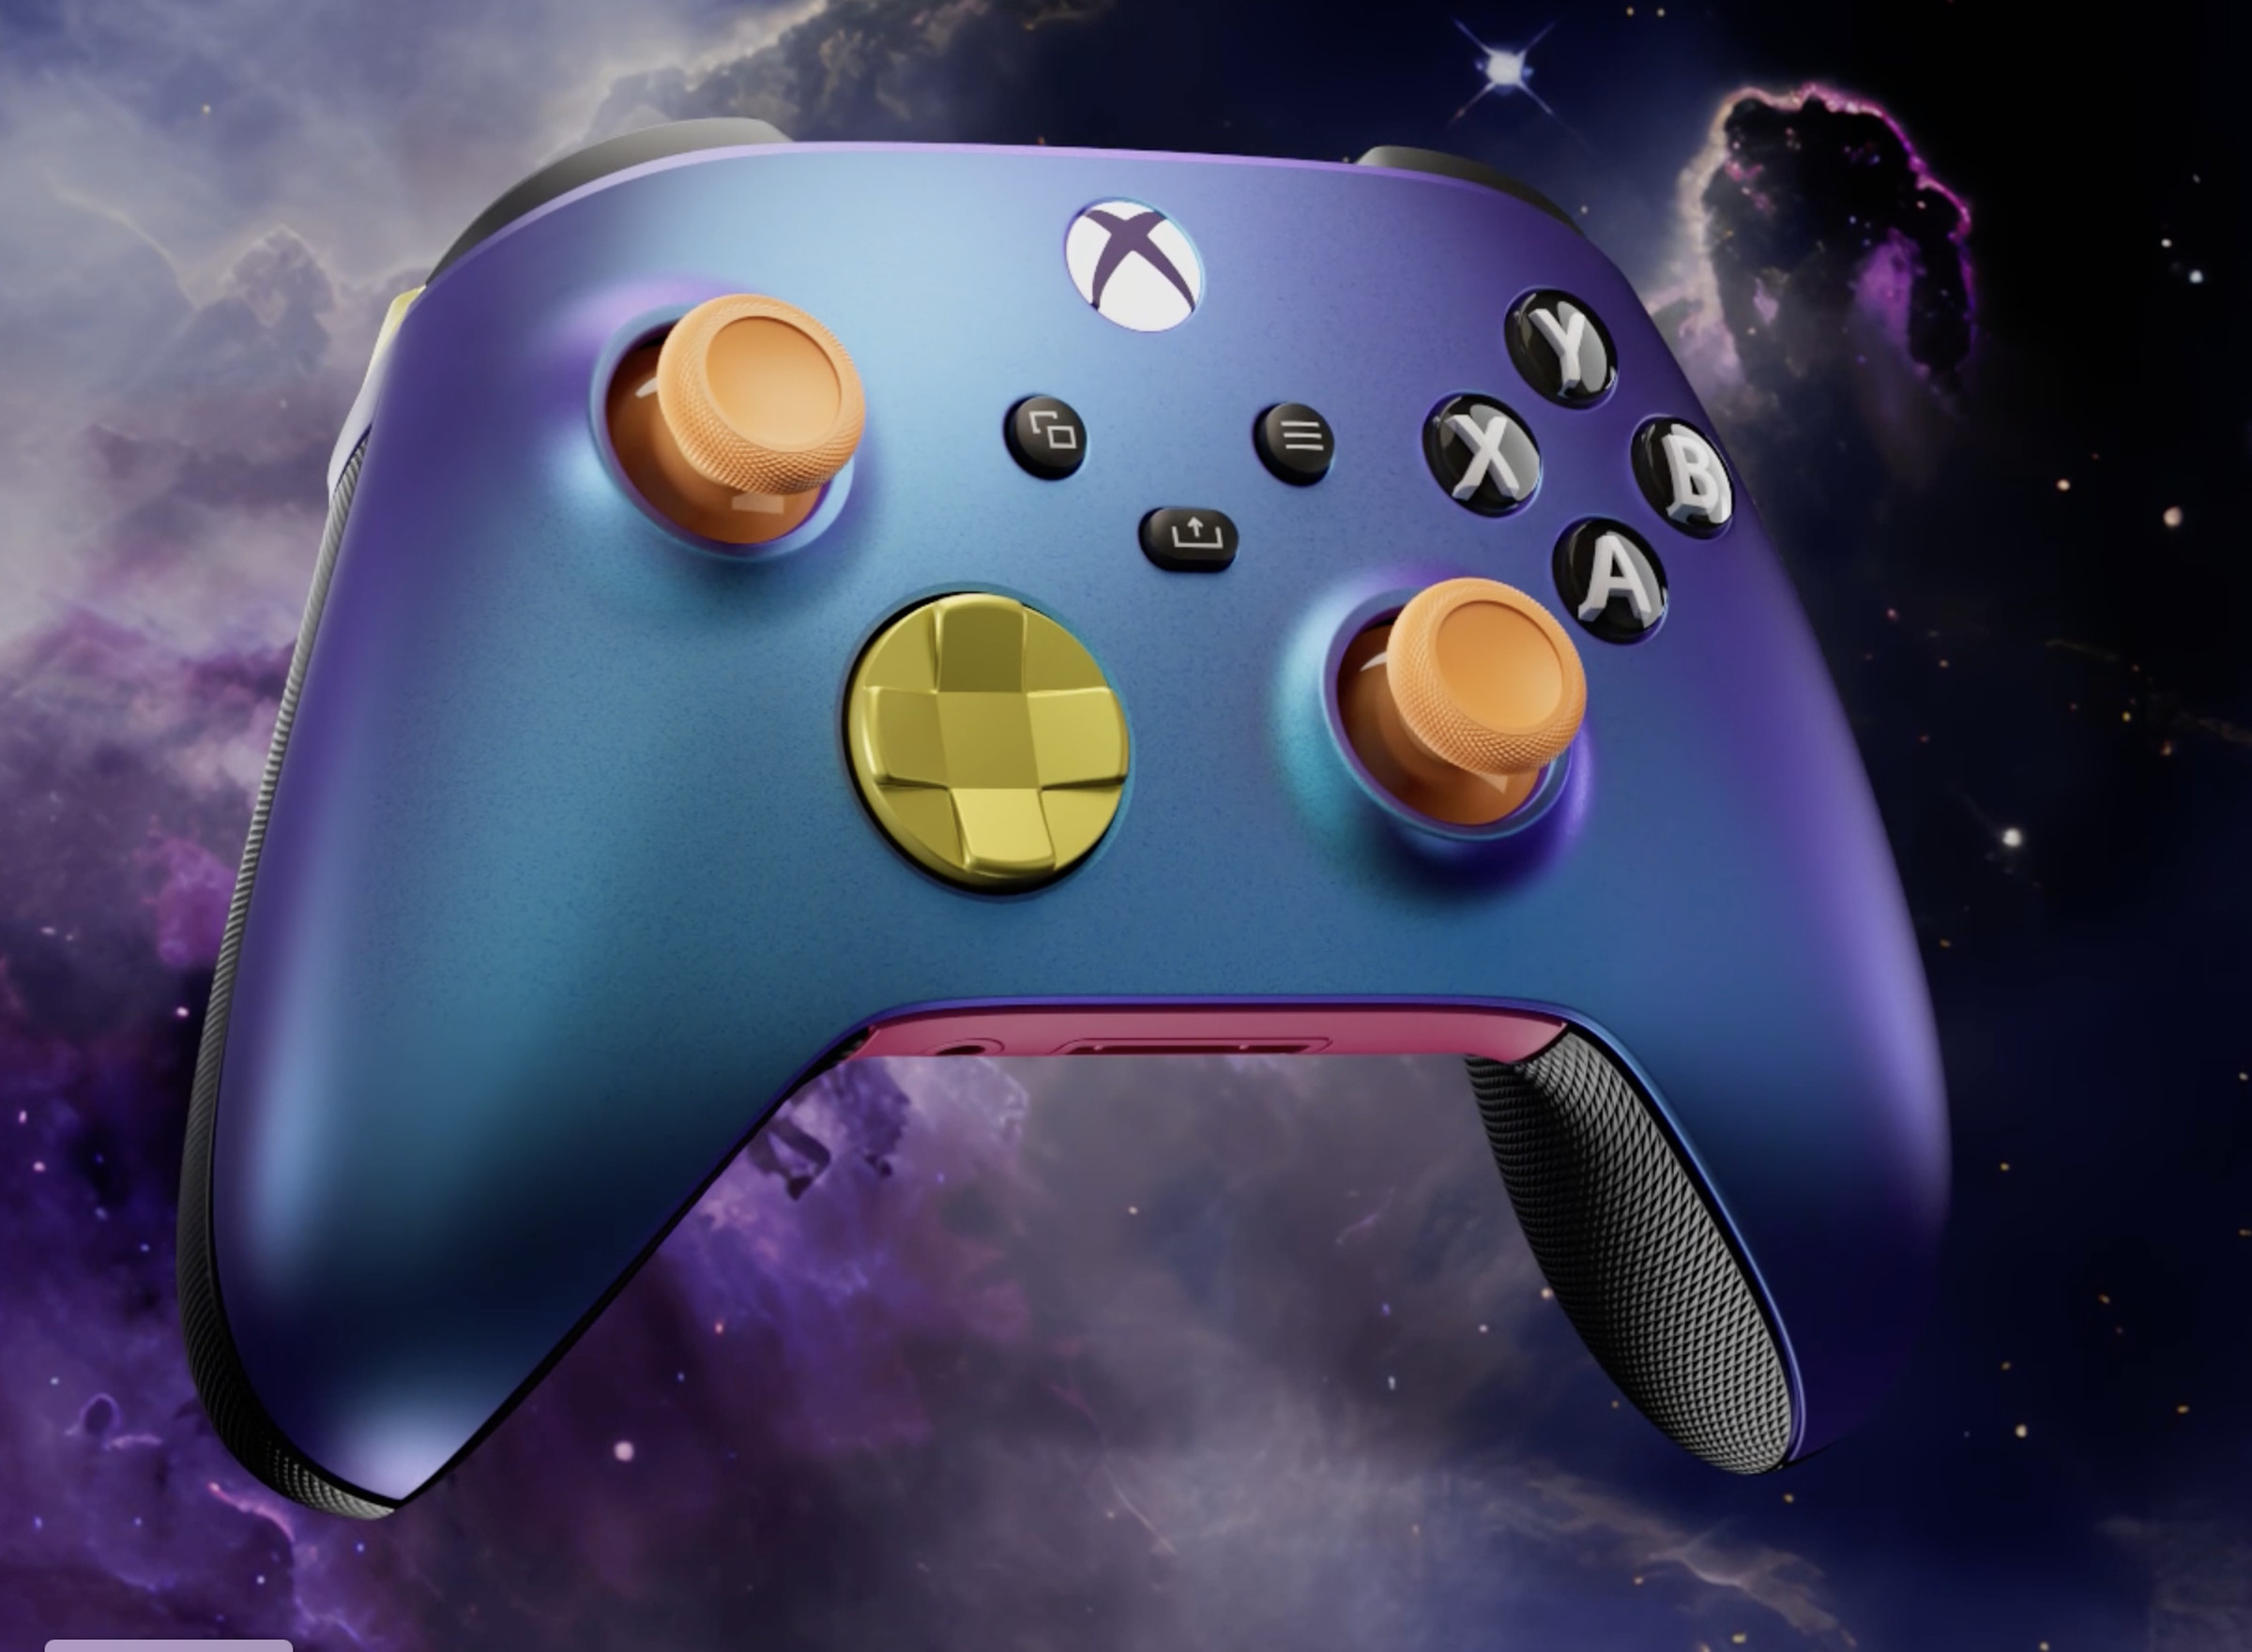 An Xbox controller sporting the Stellar Shift colorway.